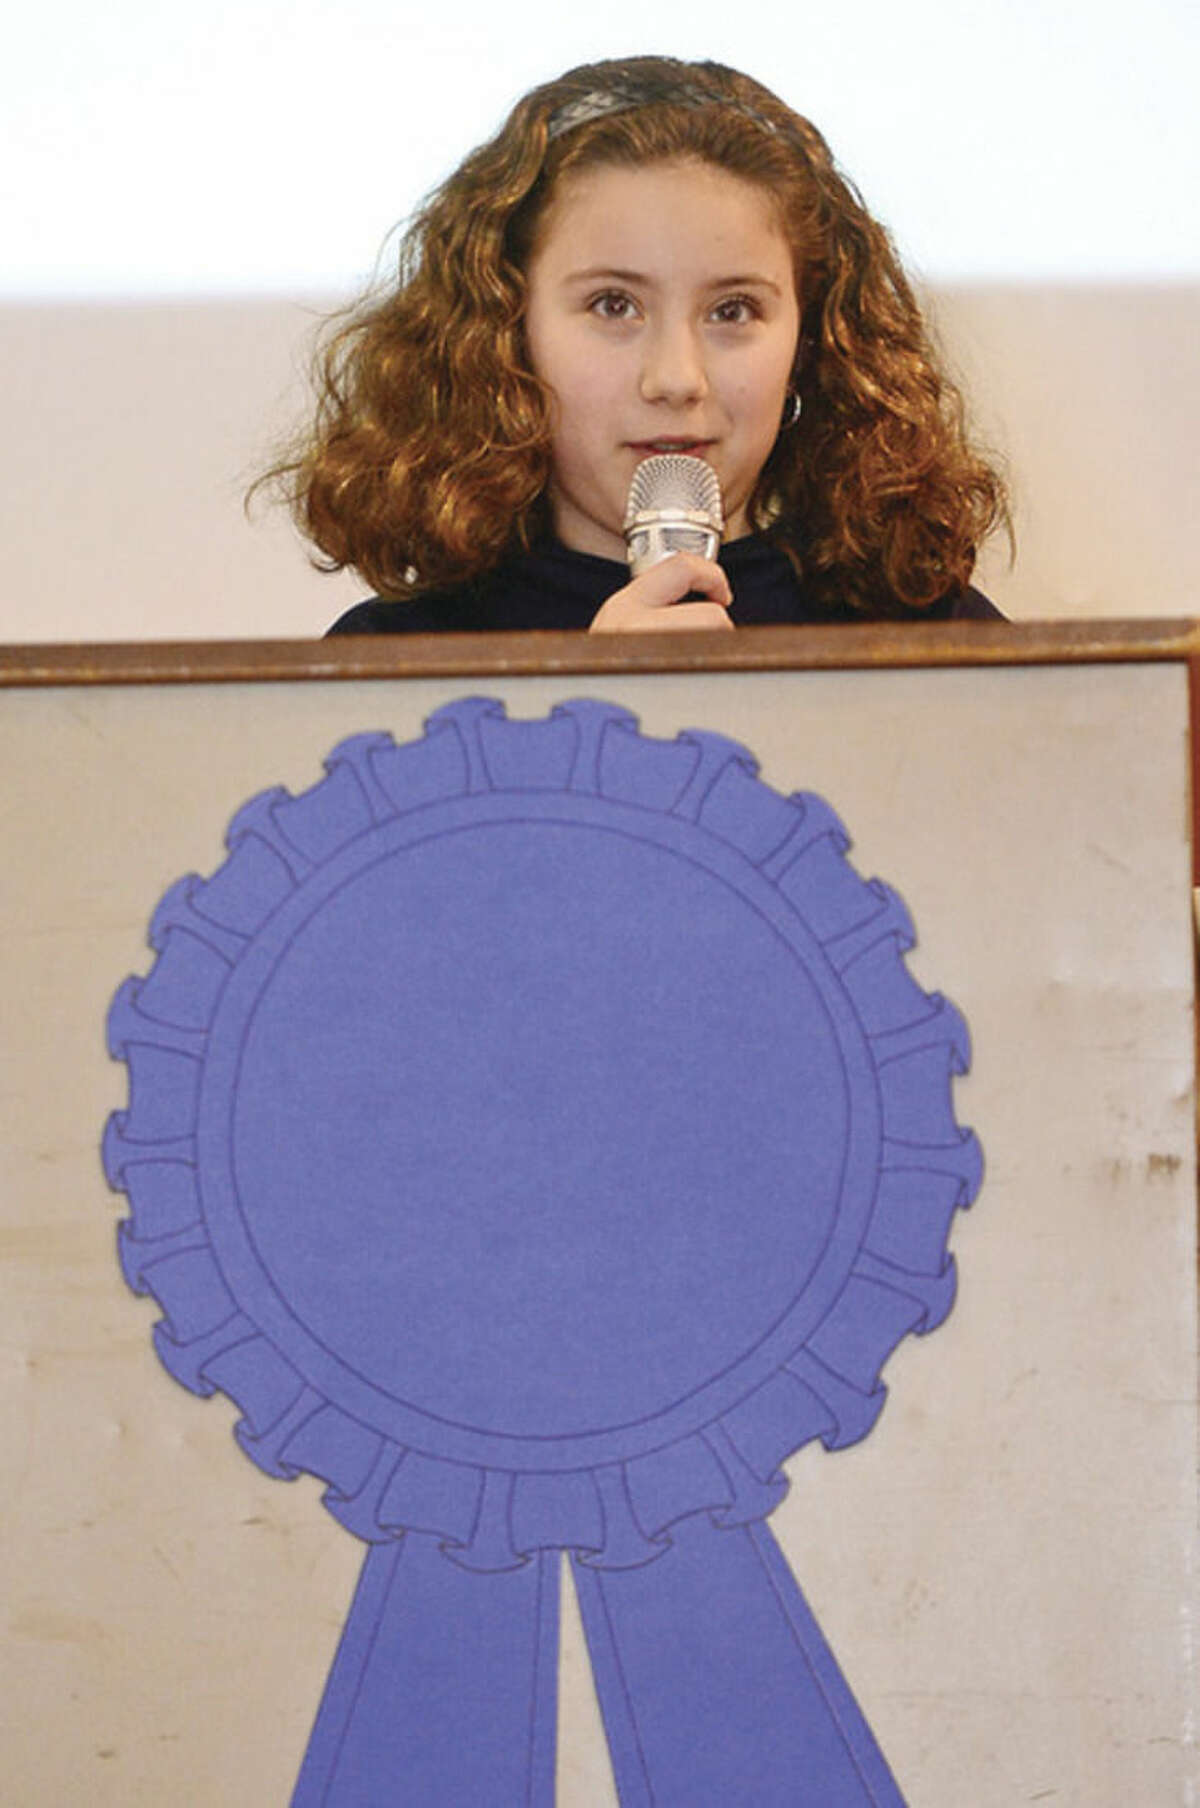 Hour photo / Erik Trautmann Jefferson Science Magnet School 5th grader Kaitlyn Giancaspro sepaks to students, faculty and guests as the school celebrates the National Blue Ribbon Award they received for closing the achievement gap between student sub-groups during a ceremony Tuesday morning.